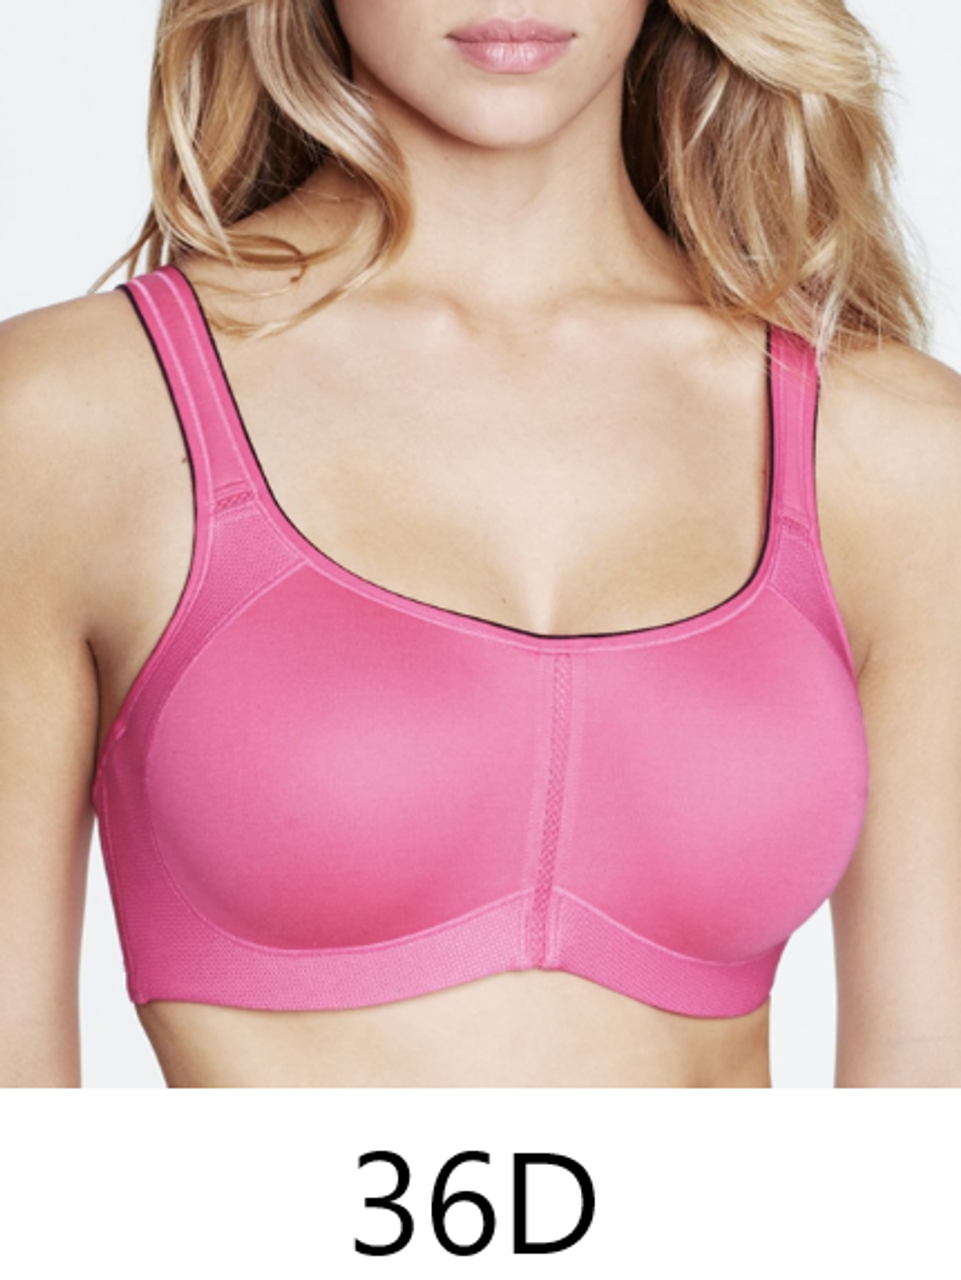 Dominique Zoe Pro Max Support Sports Bra in Pink FINAL SALE NORMALLY $62 -  Busted Bra Shop